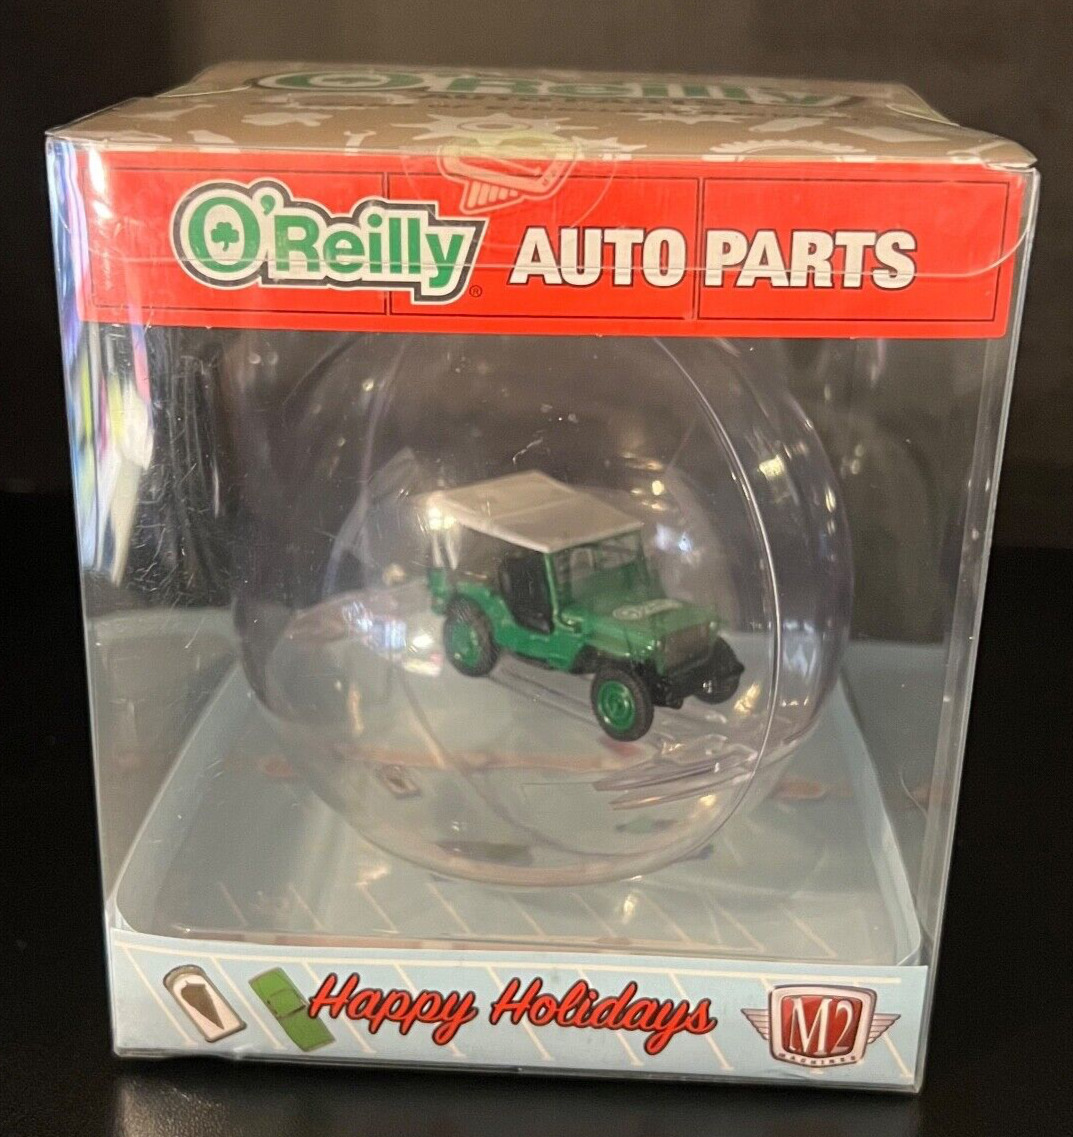 O’Reilly Auto Parts Willy’s Jeep 1944 M2 Machines Christmas Ornament 2022w/box